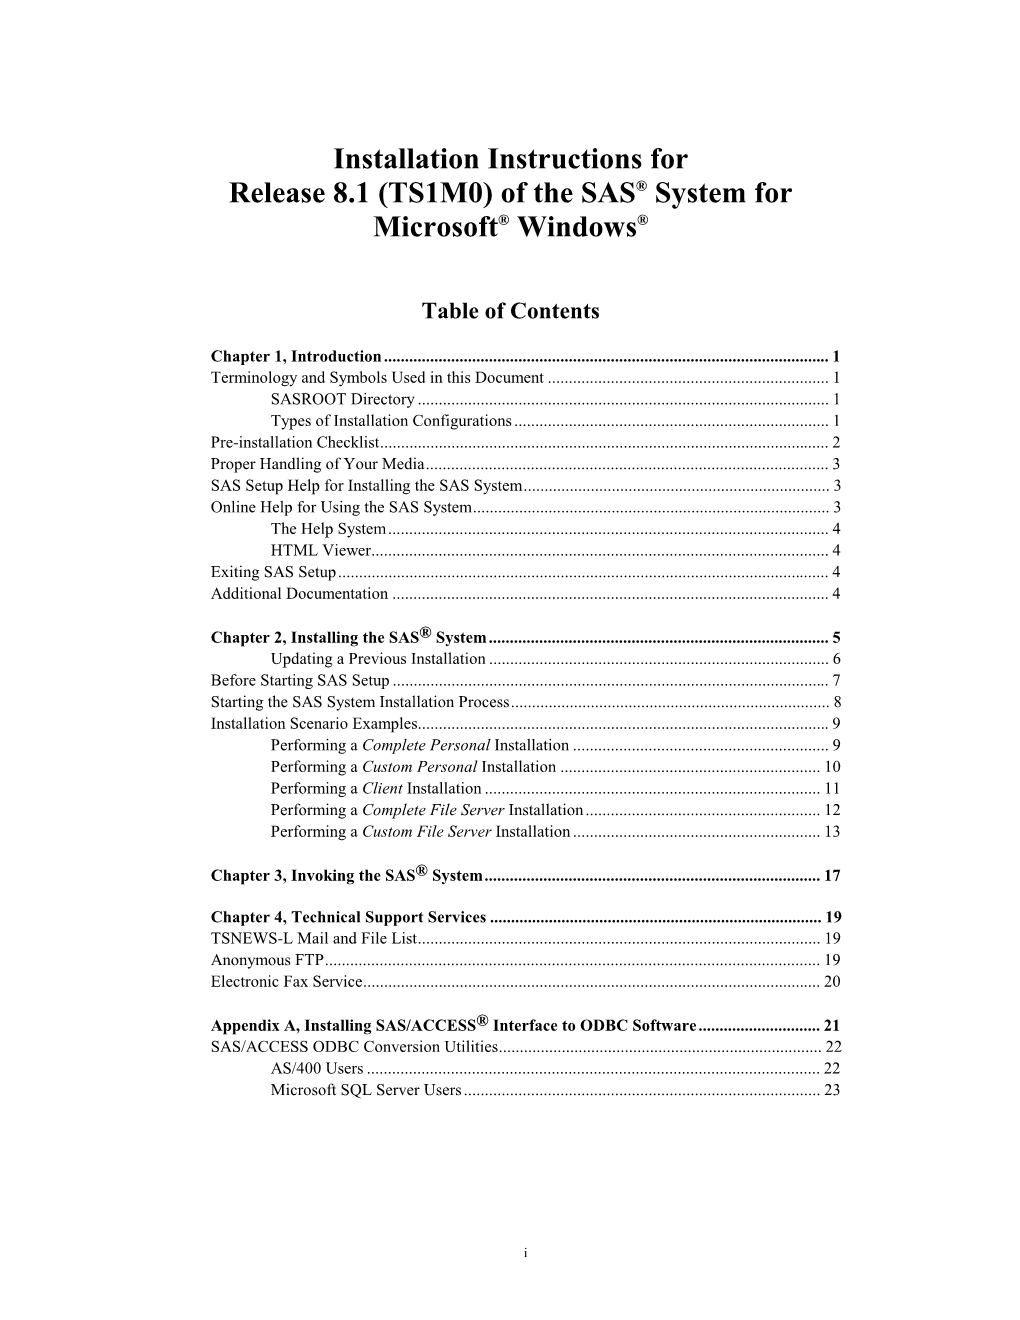 Installation Instructions for Version 8 (TS M0) of the SAS System For